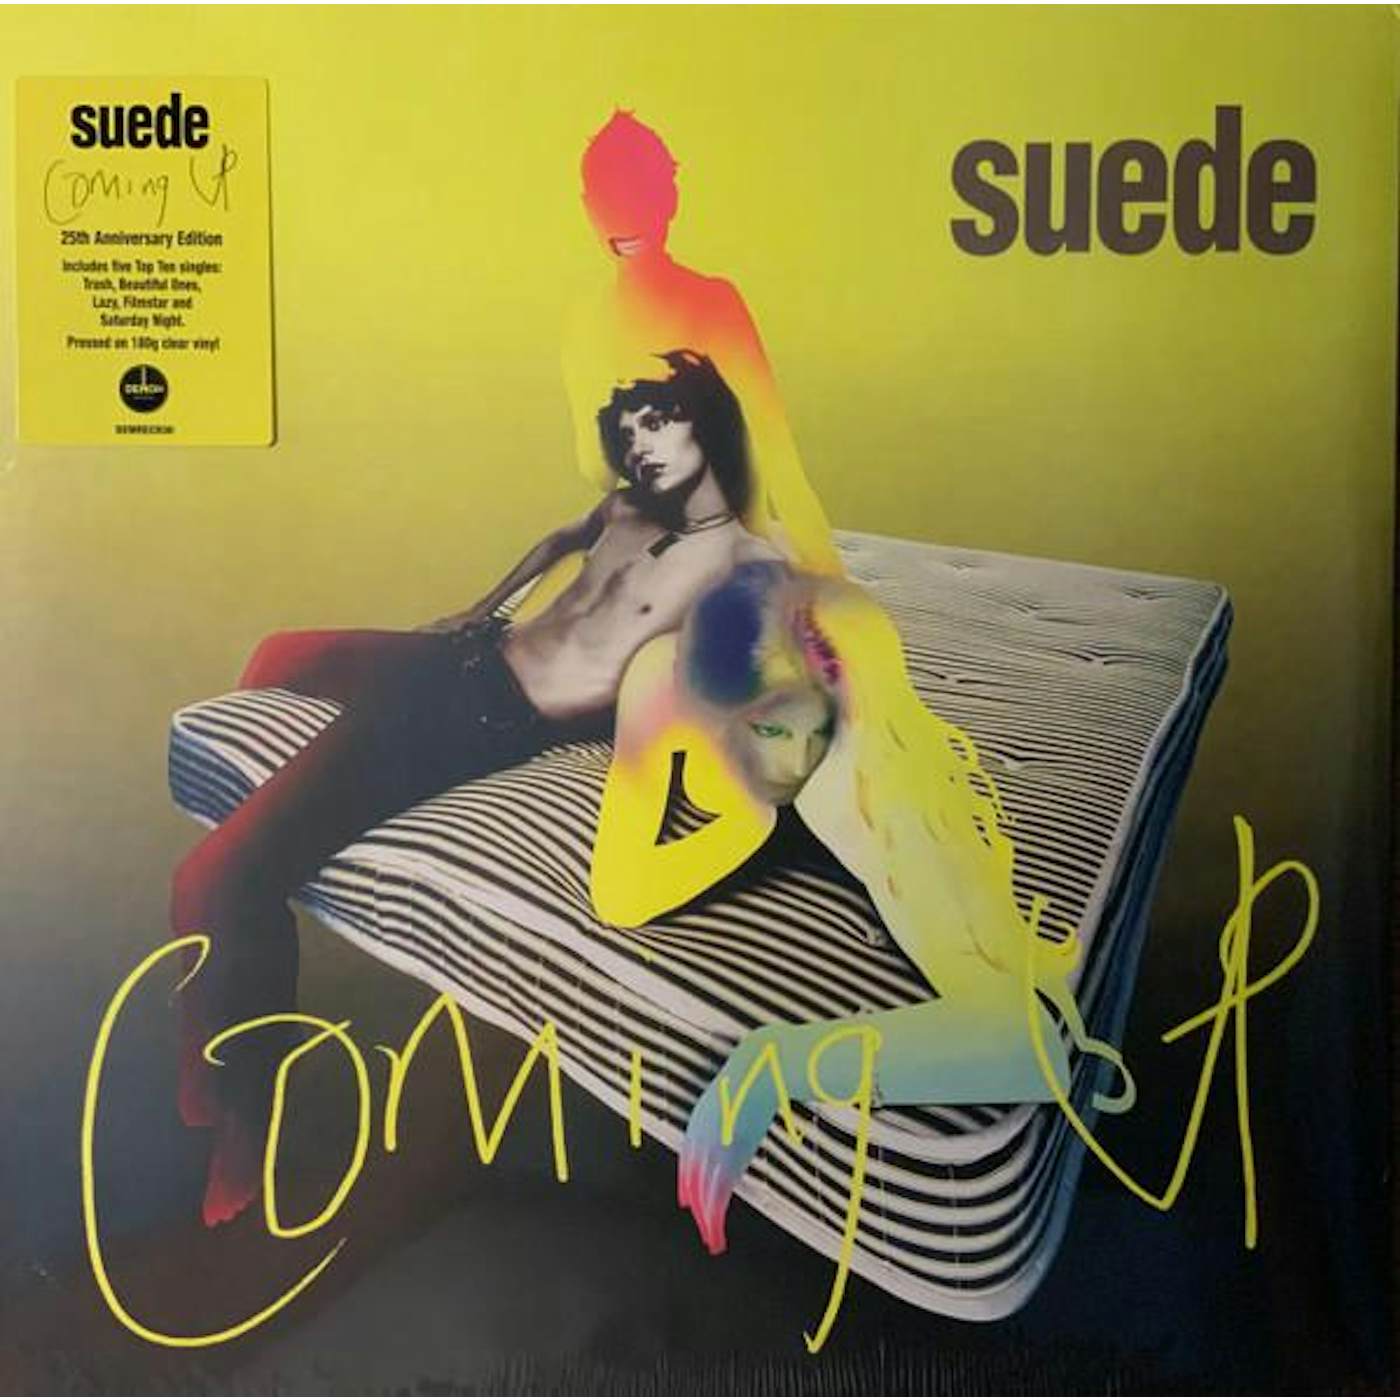 Suede COMING UP (25TH ANNIVERSARY EDITION/180G/CLEAR VINYL) Vinyl Record